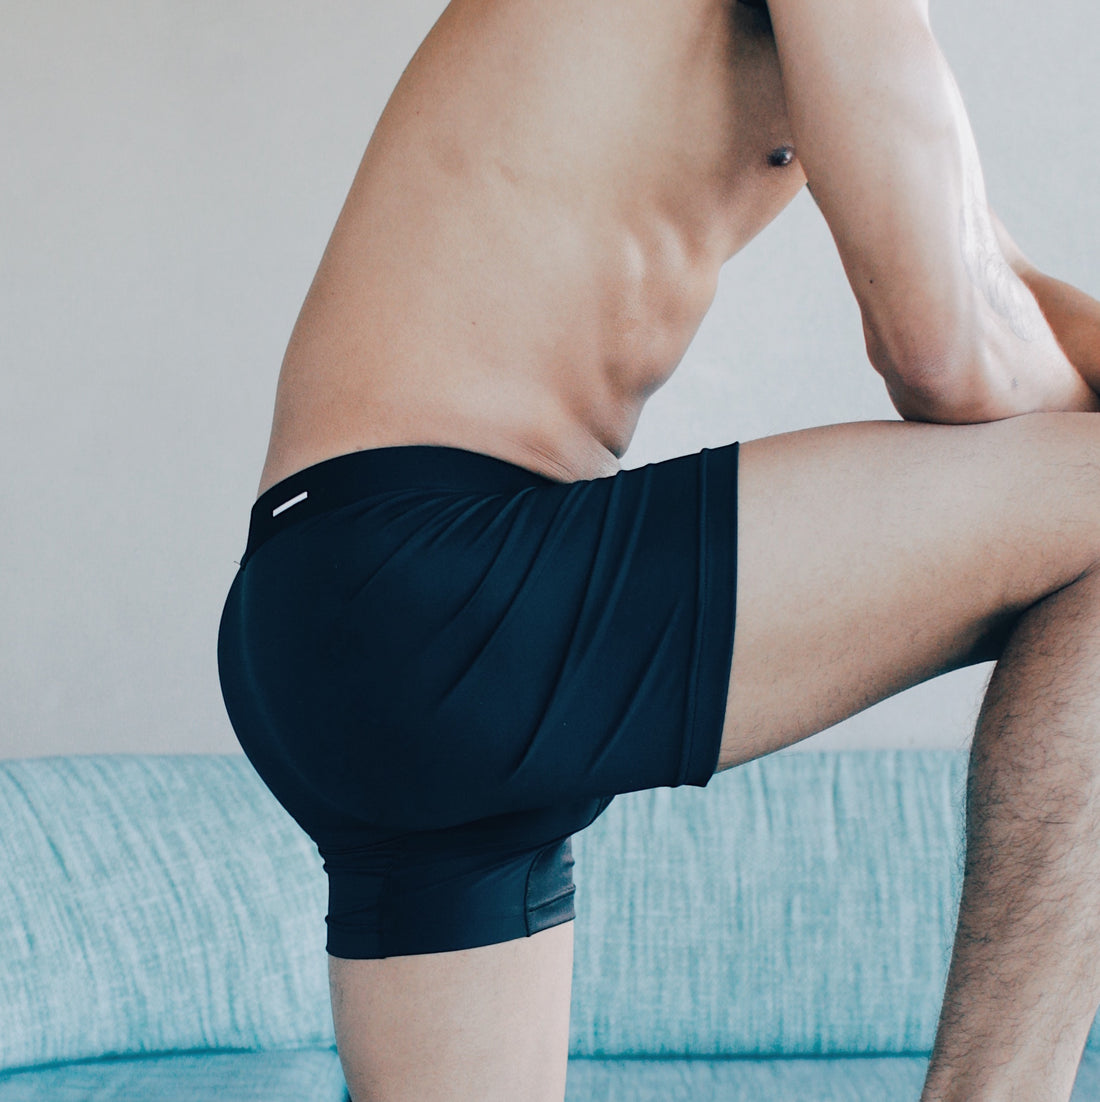 The Underwear So Comfortable You Will Forget You're Even Wearing Them